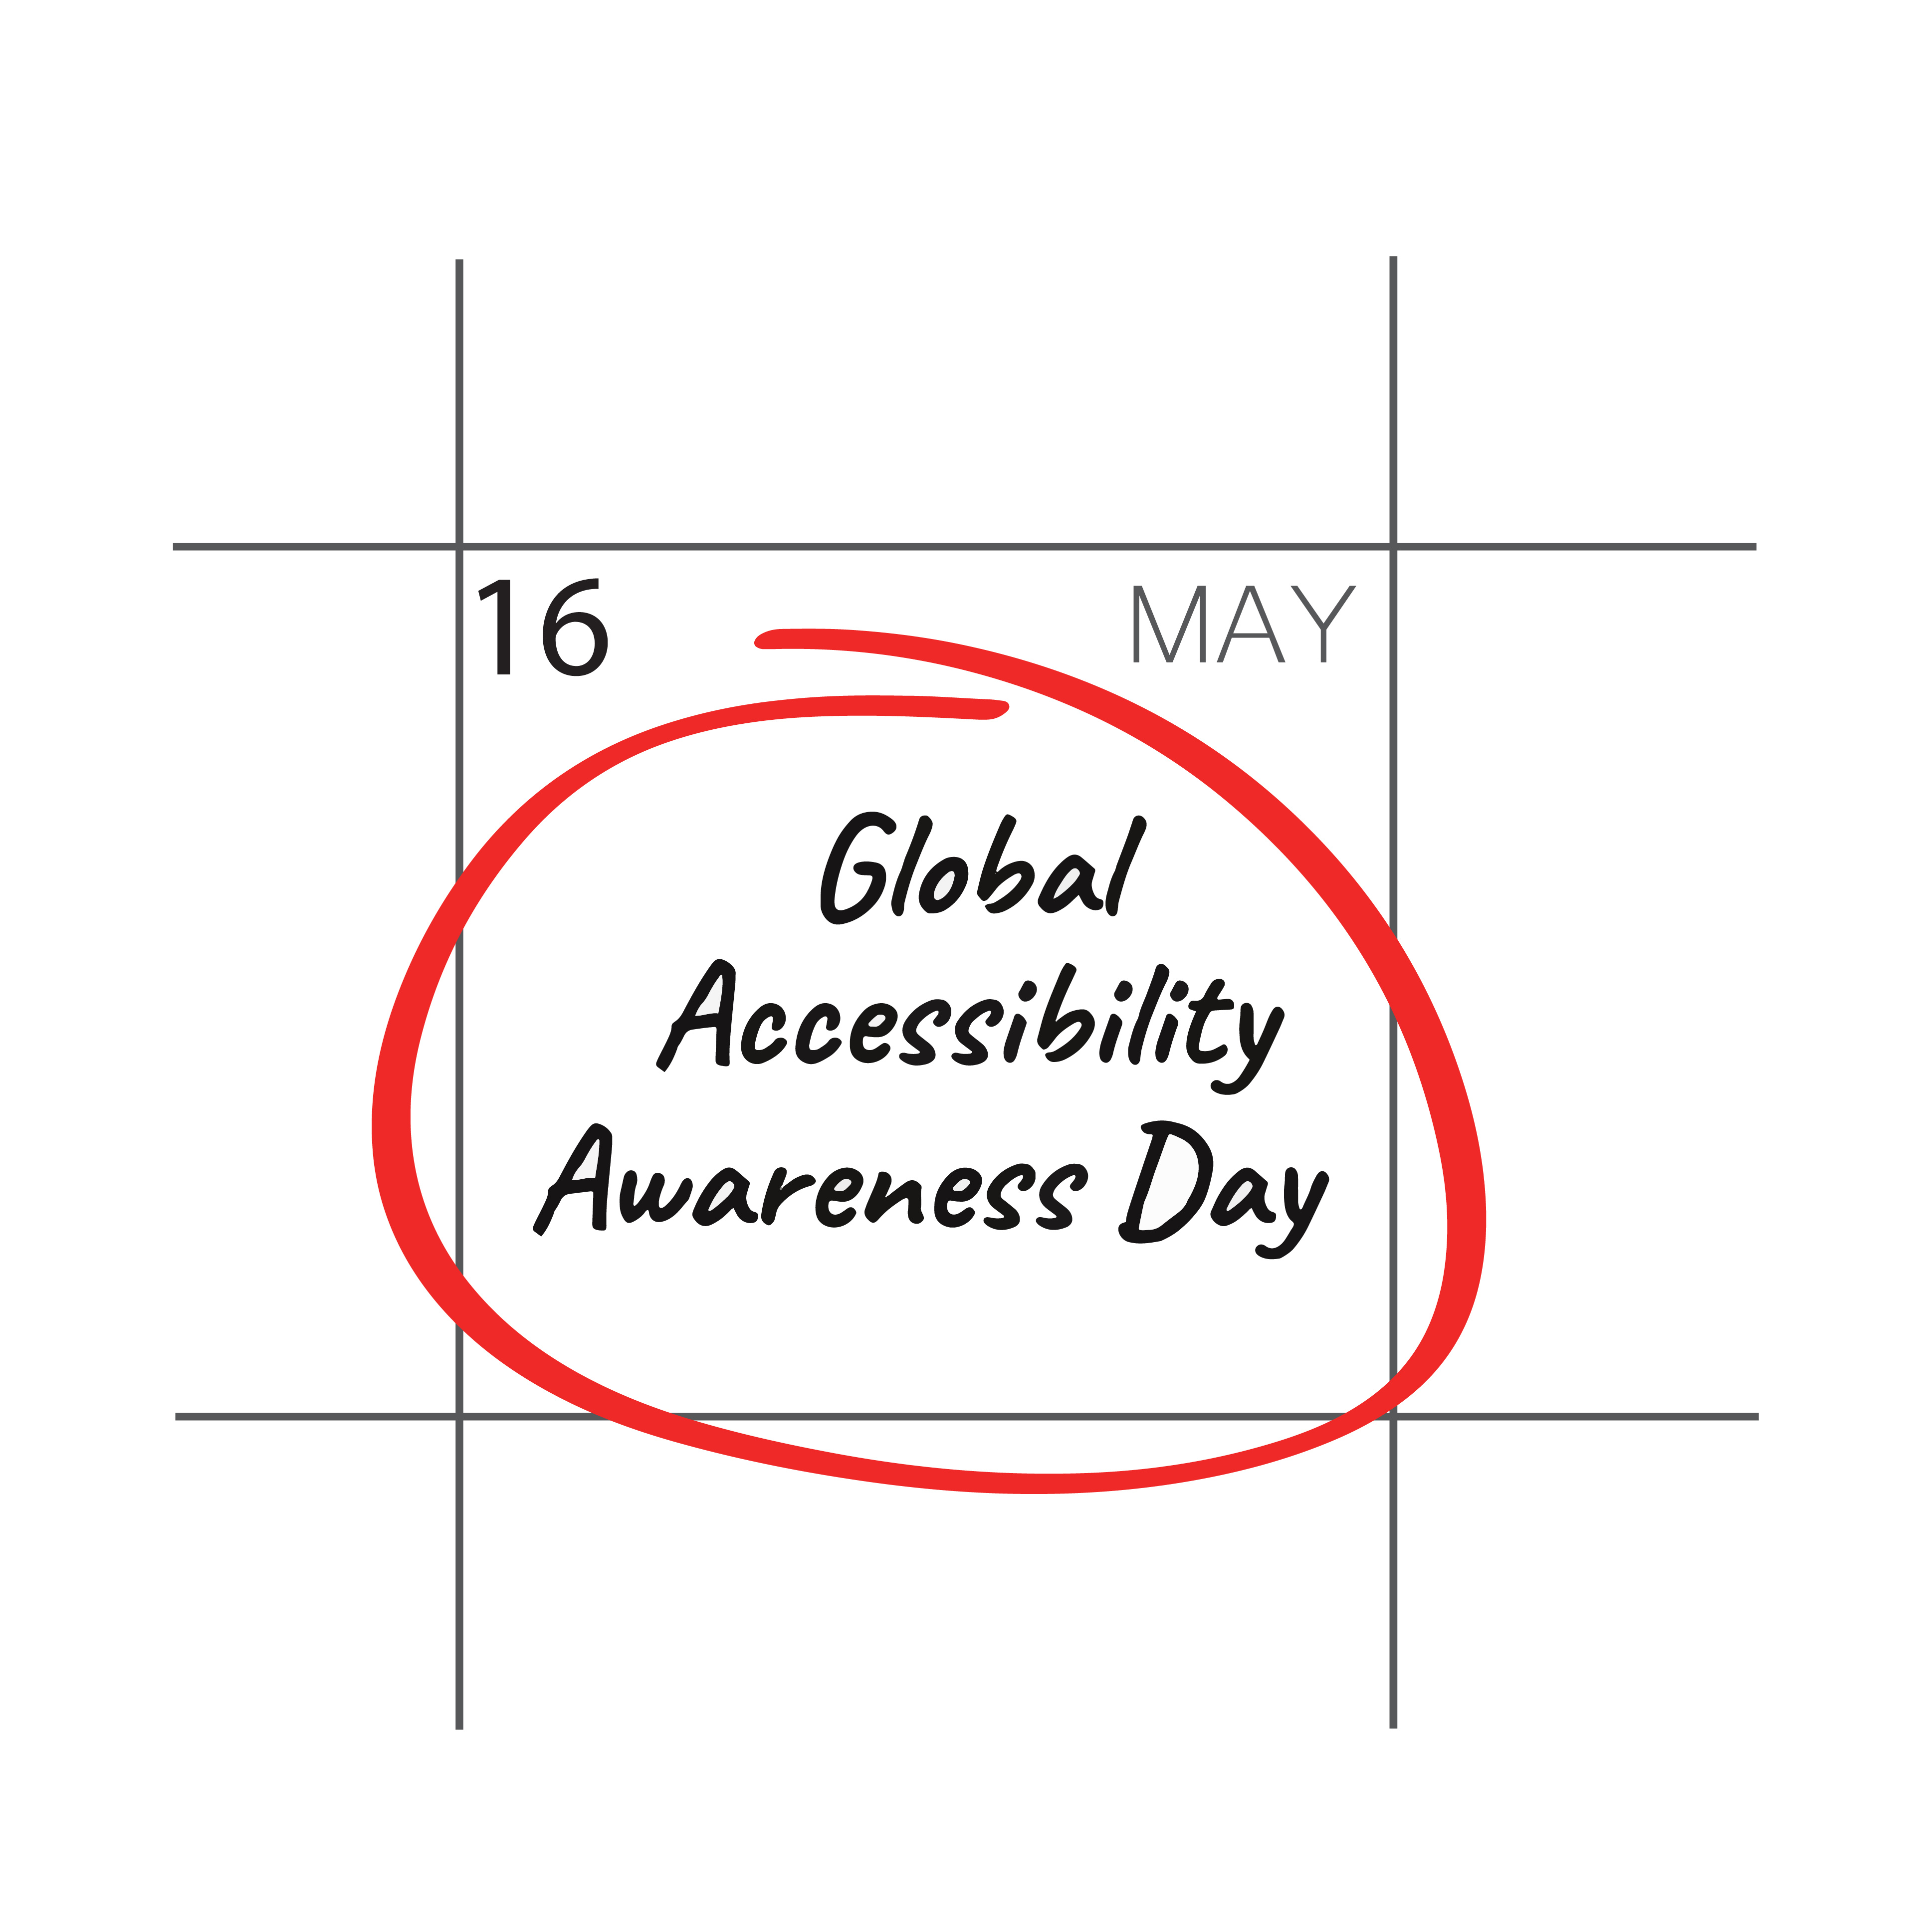 A calendar shot of the 16th with the word Global Accessibility Awareness Day